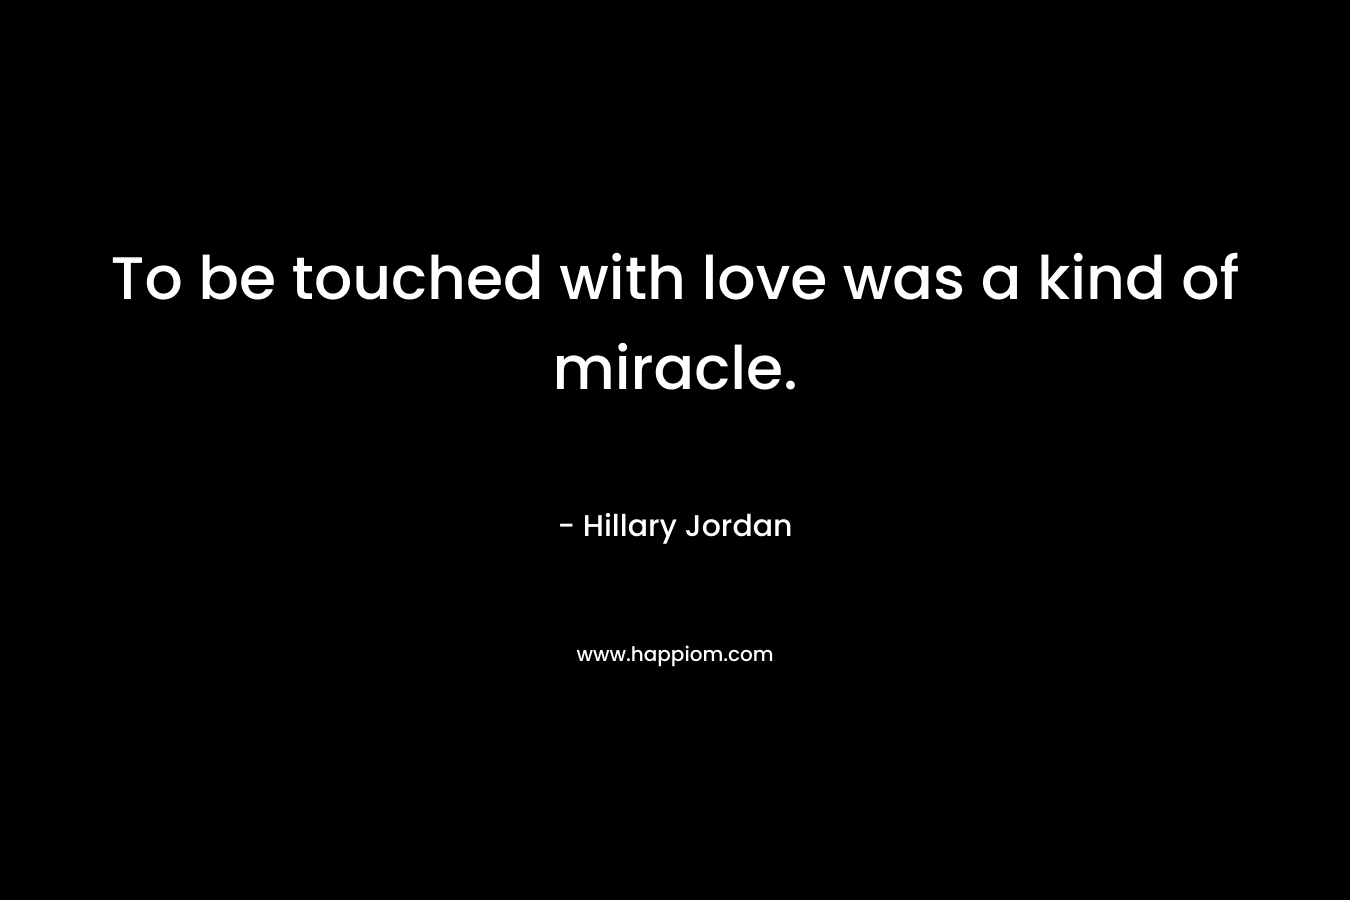 To be touched with love was a kind of miracle. – Hillary Jordan